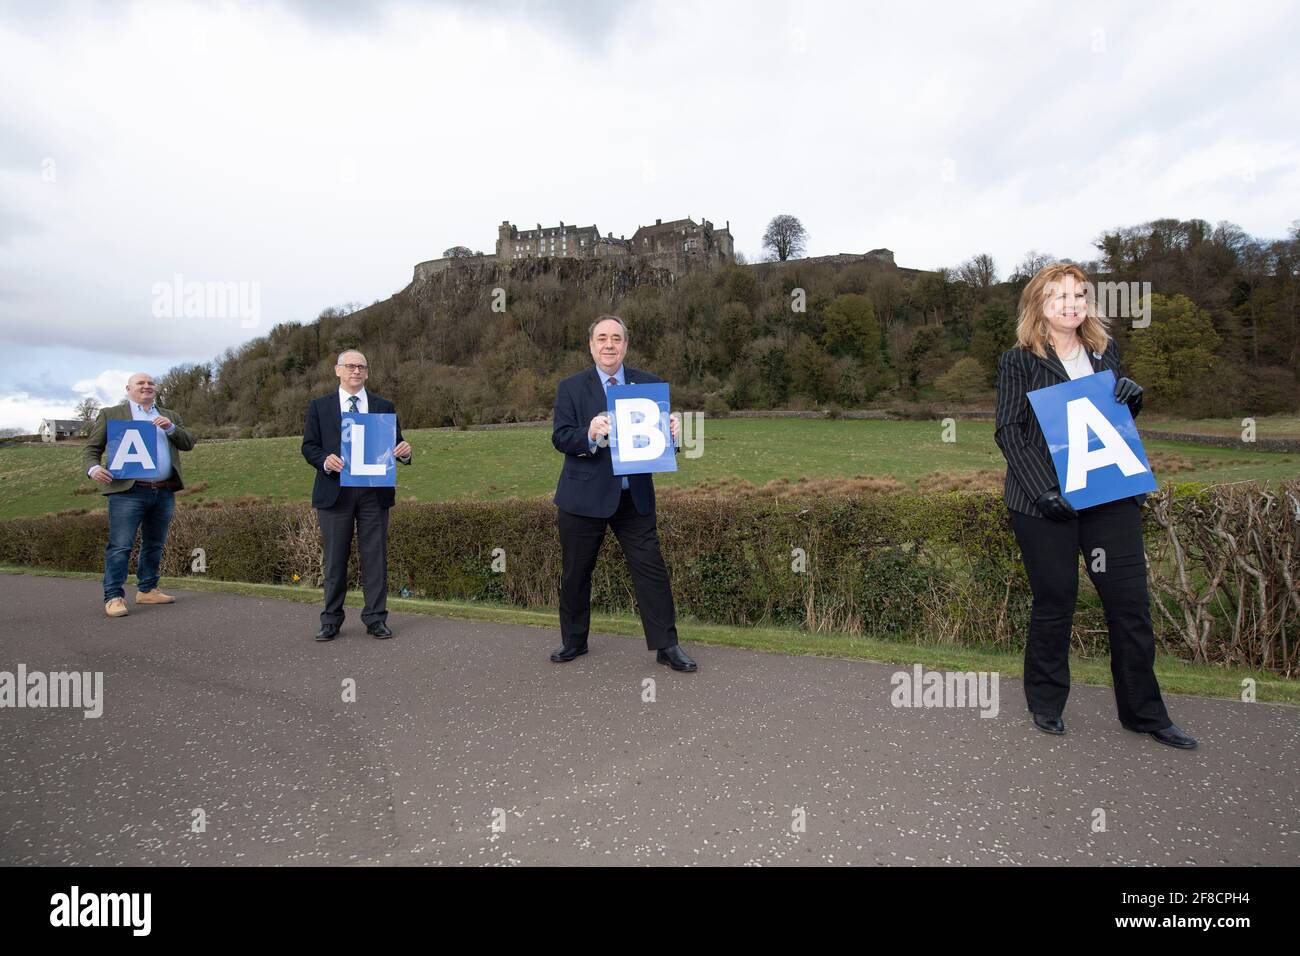 Stirling, Scotland, UK. 13th Apr, 2021. PICTURED: (L-R) Neale Hanvey MP; Jim Eadie; Rt Hon Alex Salmond; Eva Comrie. Alba Party Leader, Rt Hon Alex Salmond unveils his candidates for Mid Scotland and Fife region. Pic Credit: Colin Fisher/Alamy Live News Stock Photo